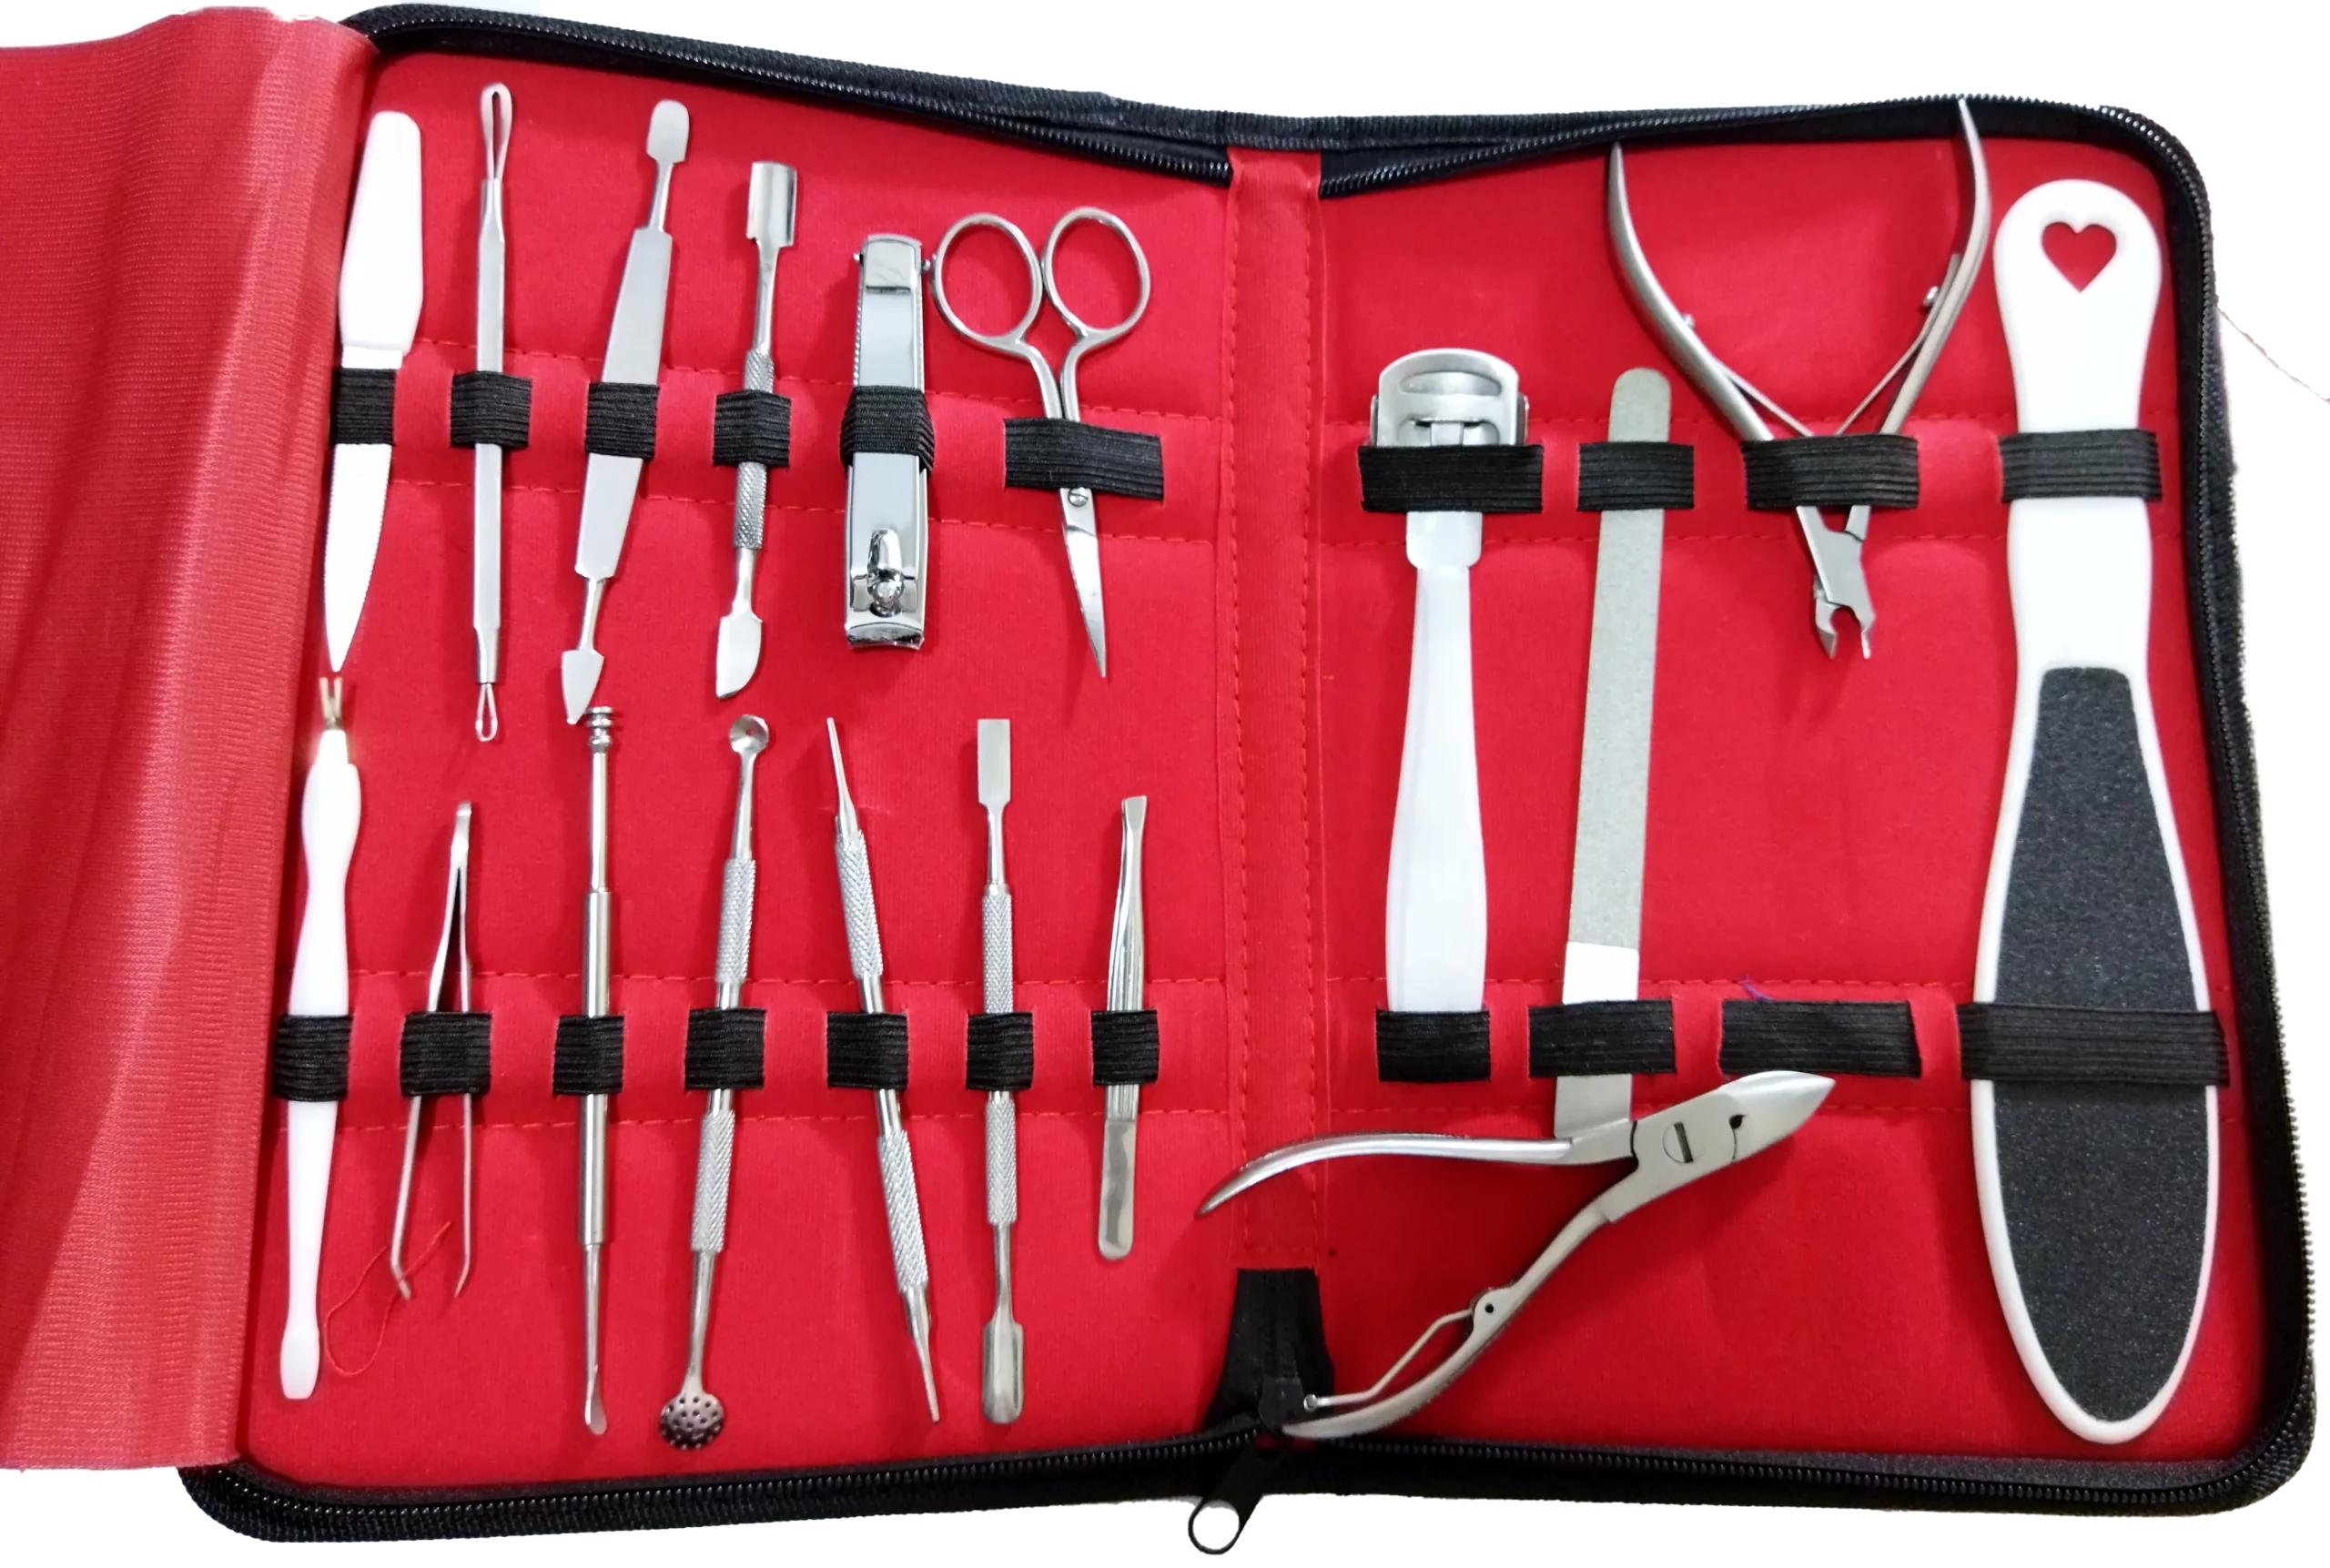 Beauty Kits for Manicure and Pedicure (Instruments only)